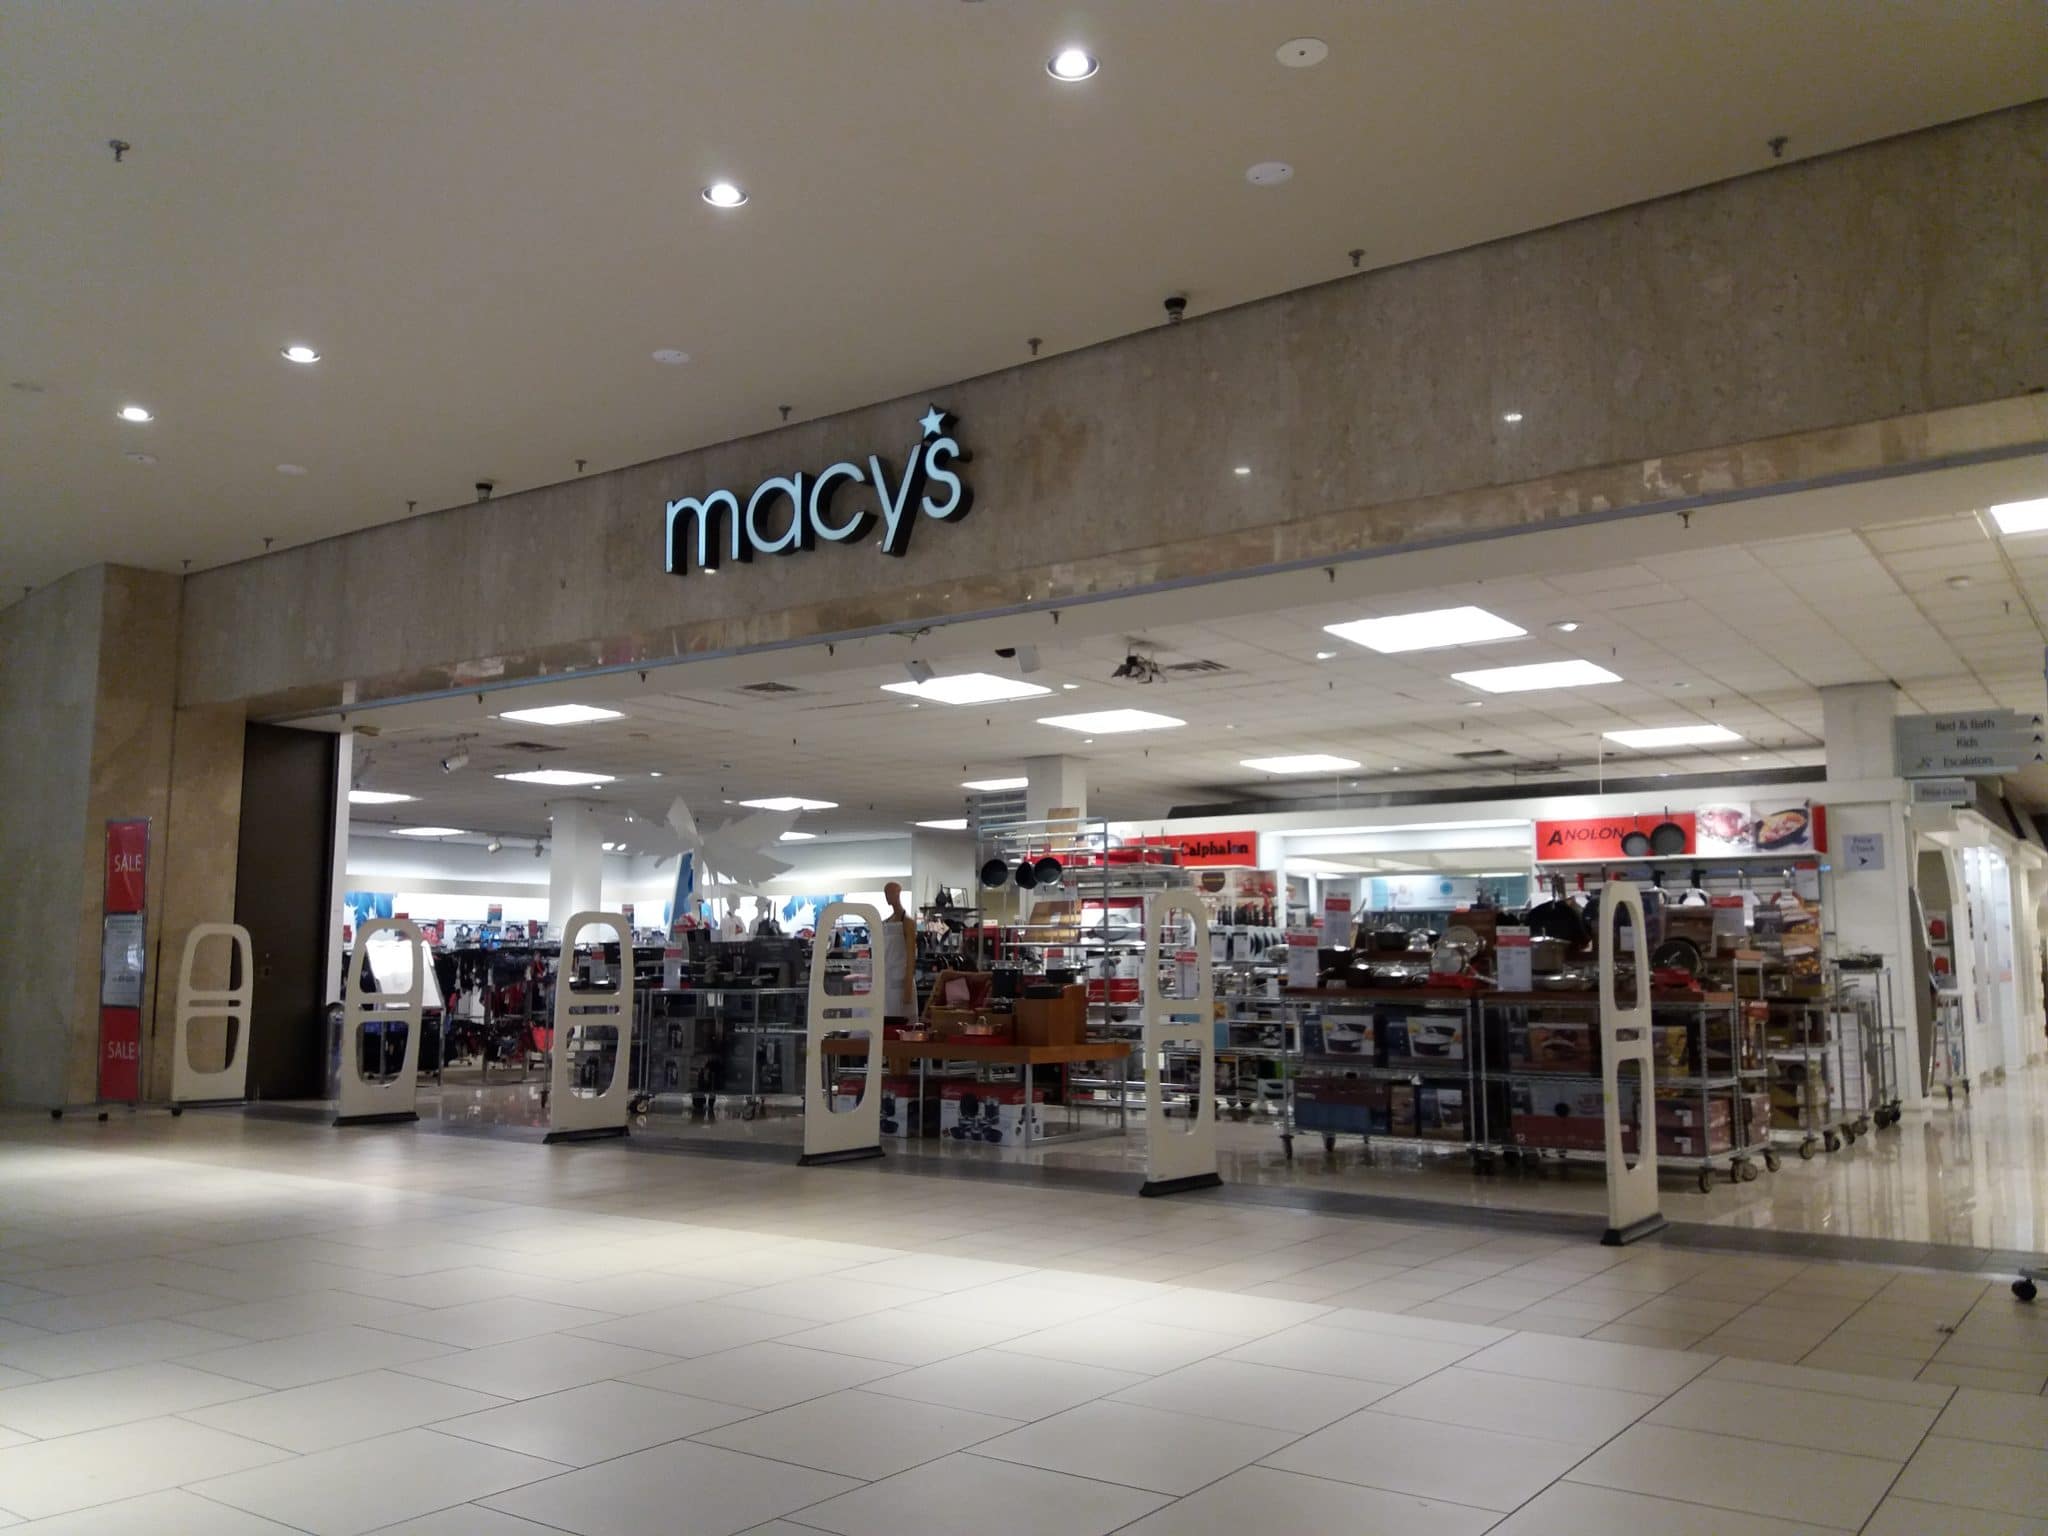 Get Ready For The Brand Toys R Us To Return Inside Macy S